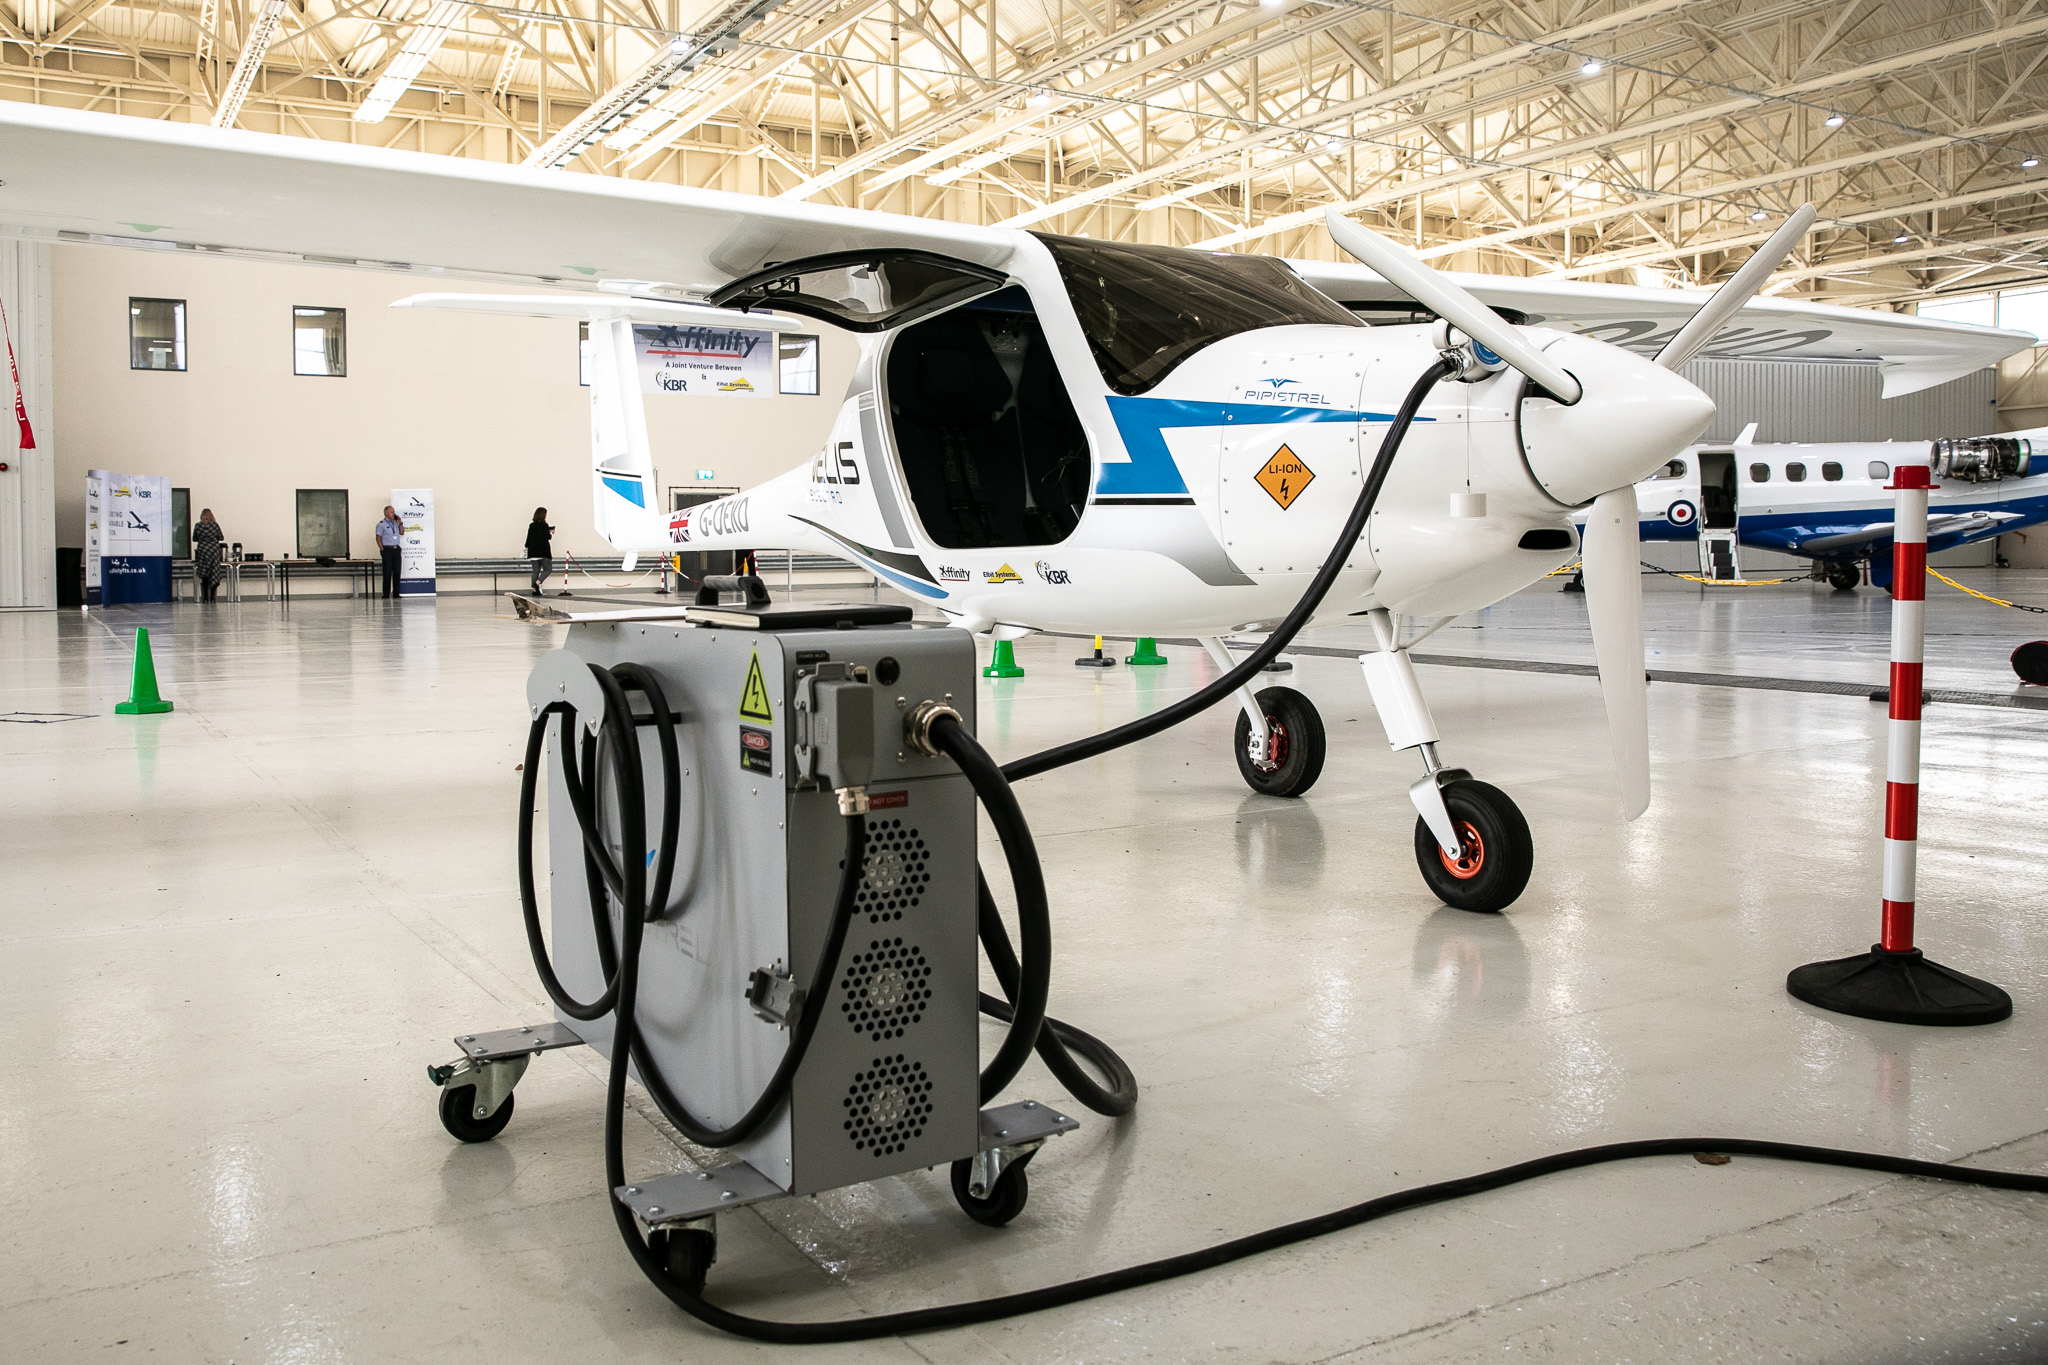 Electric aircraft plugged into charging port.